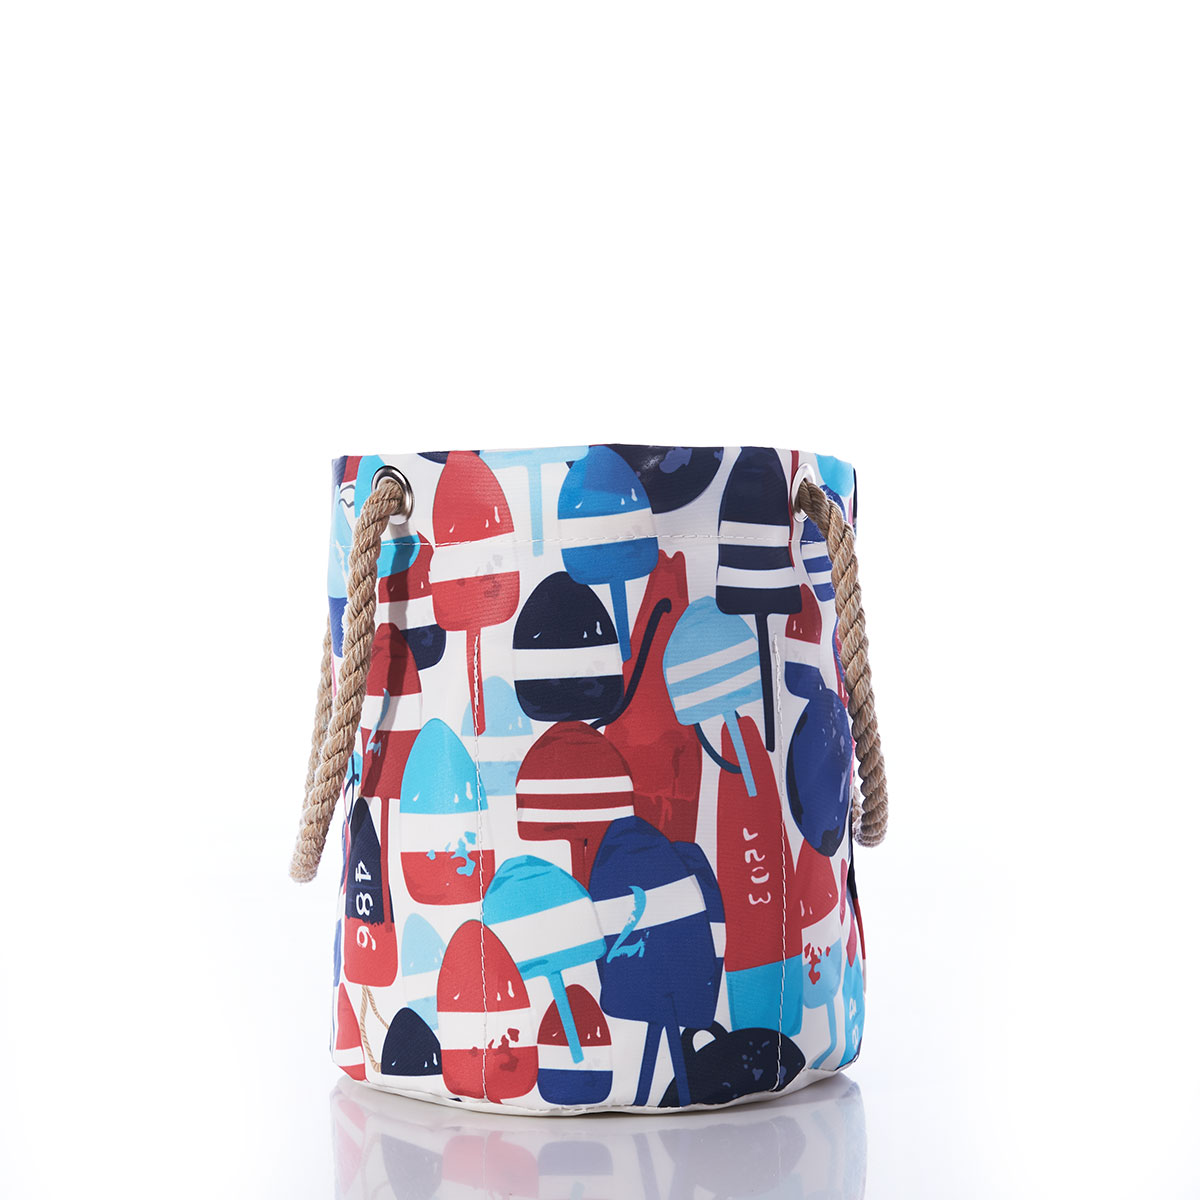 side view: a recycled sail cloth beverage bucket bag with hemp rope handles is emblazoned with a variety of printed buoys in reds and blues in different shapes and sizes